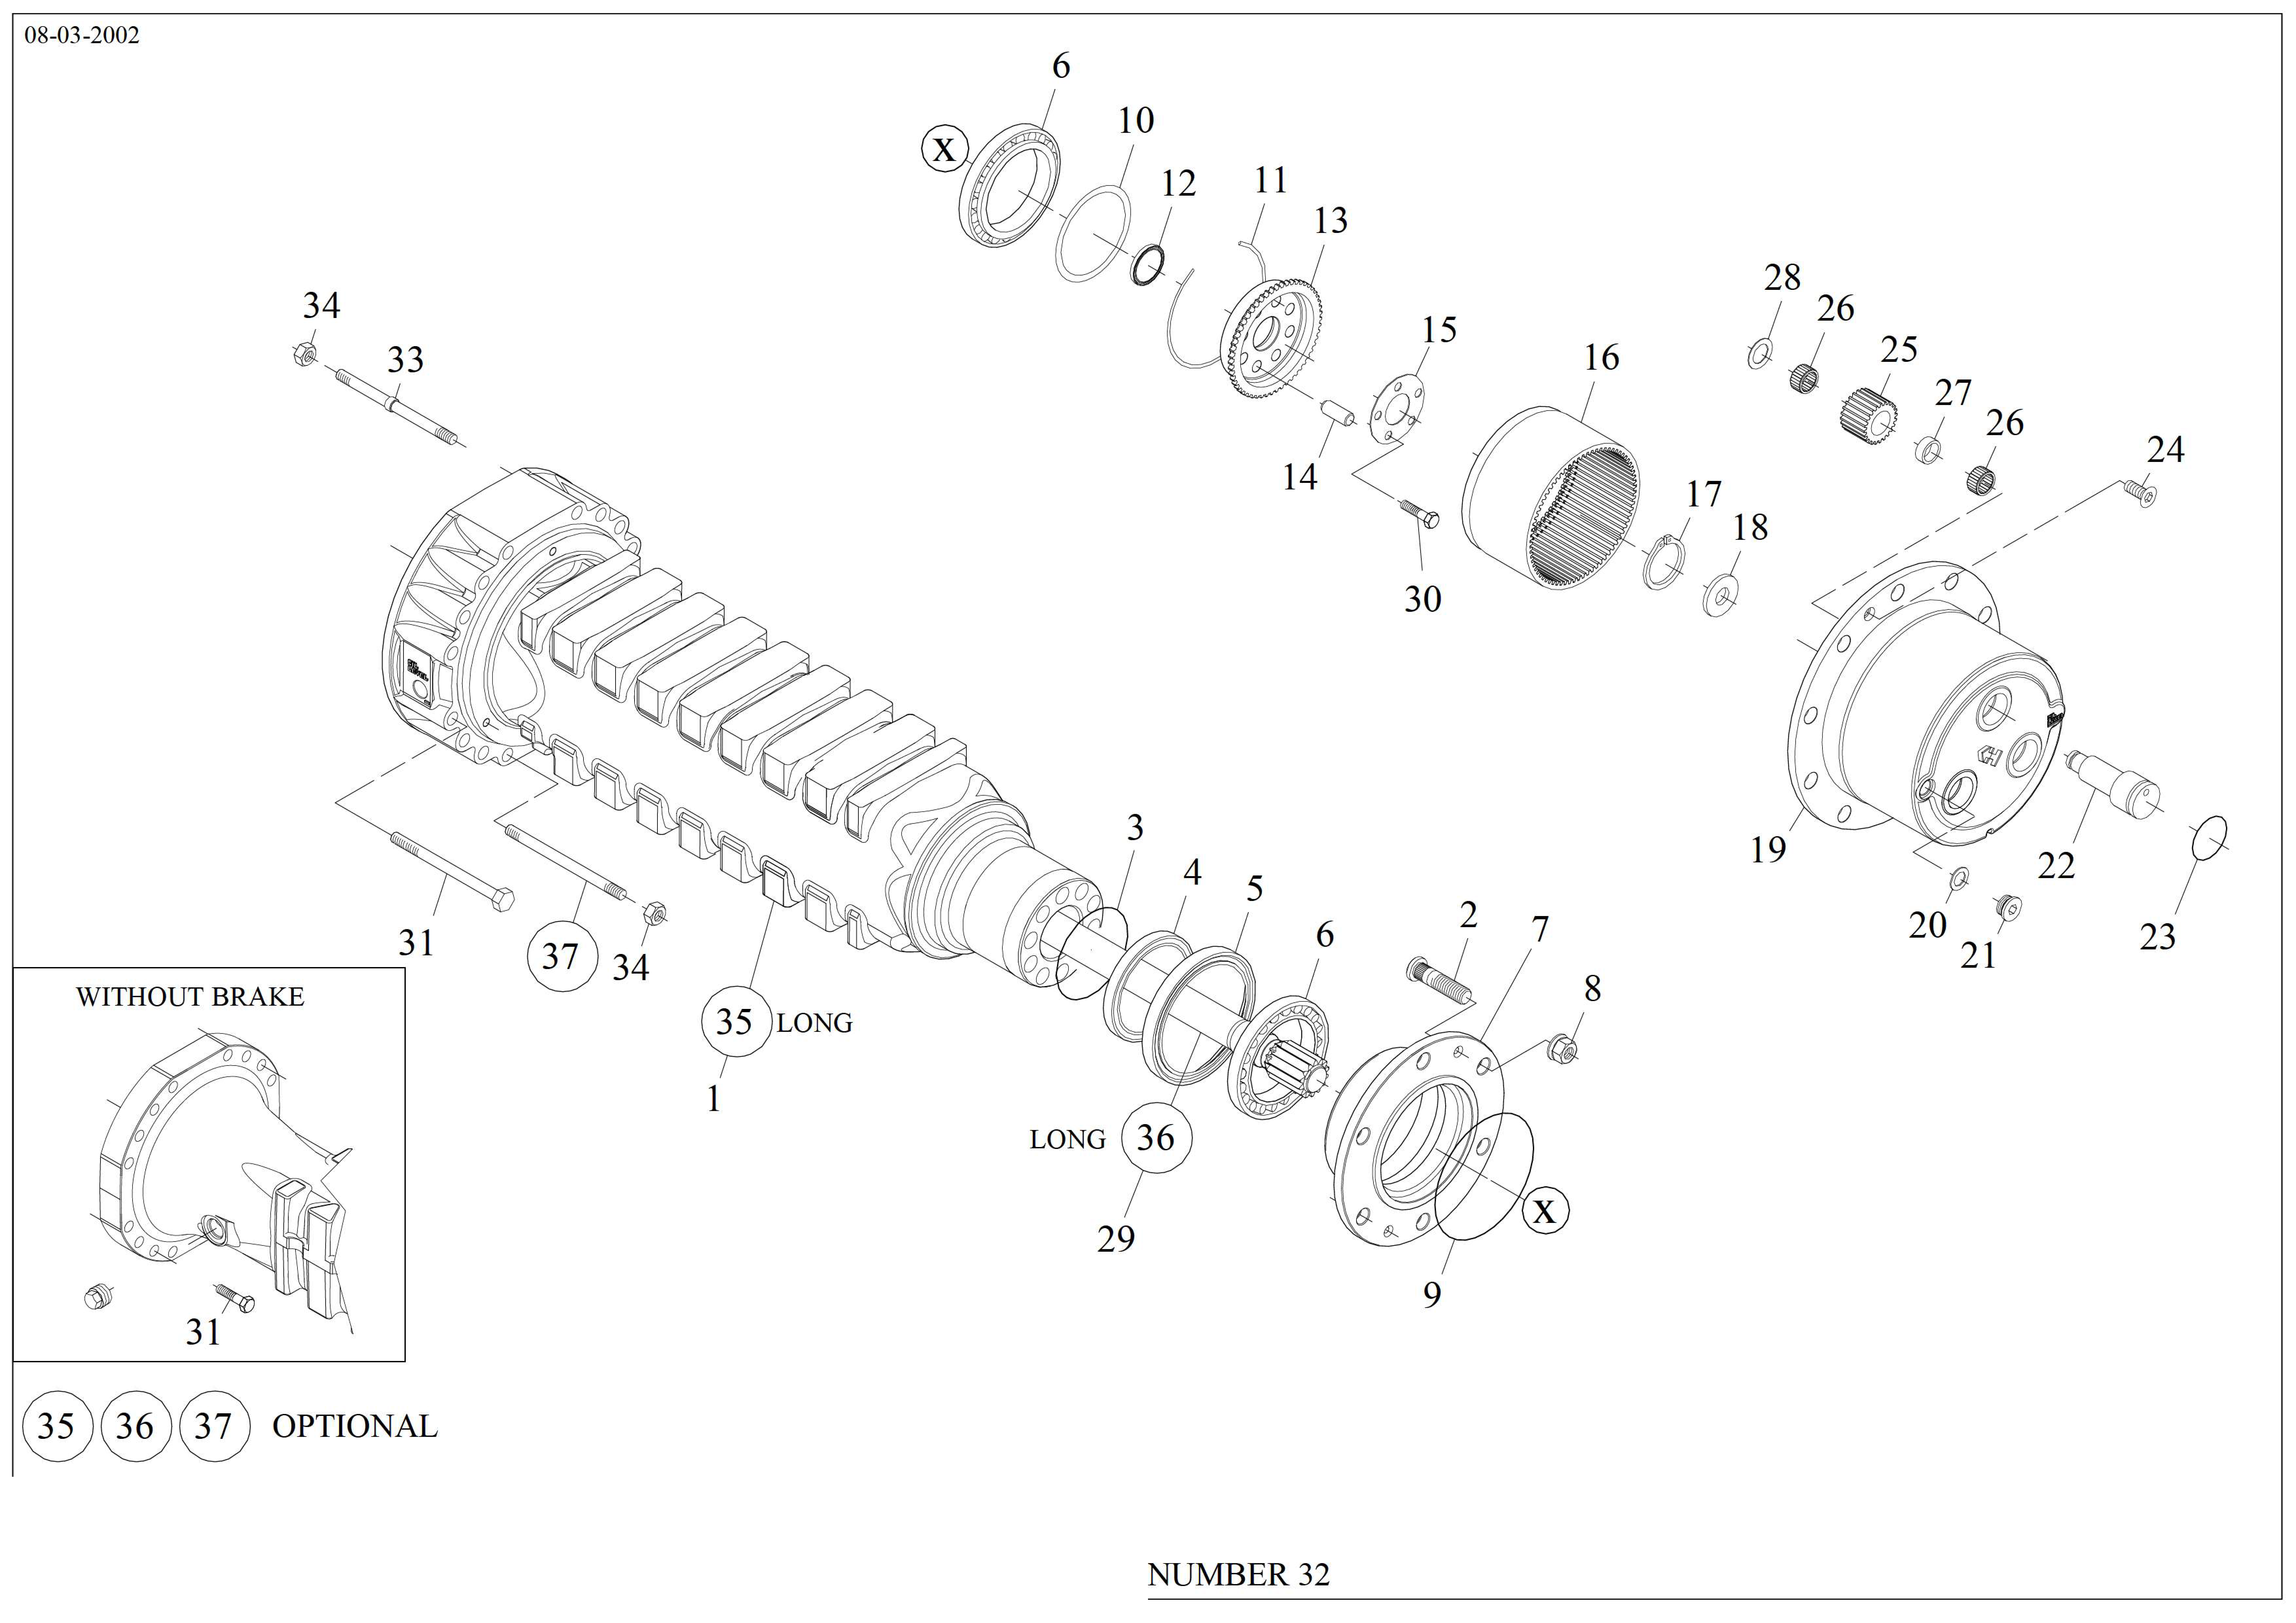 drawing for BRODERSON MANUFACTURING 0-055-00080 - TAPER ROLLER BEARING